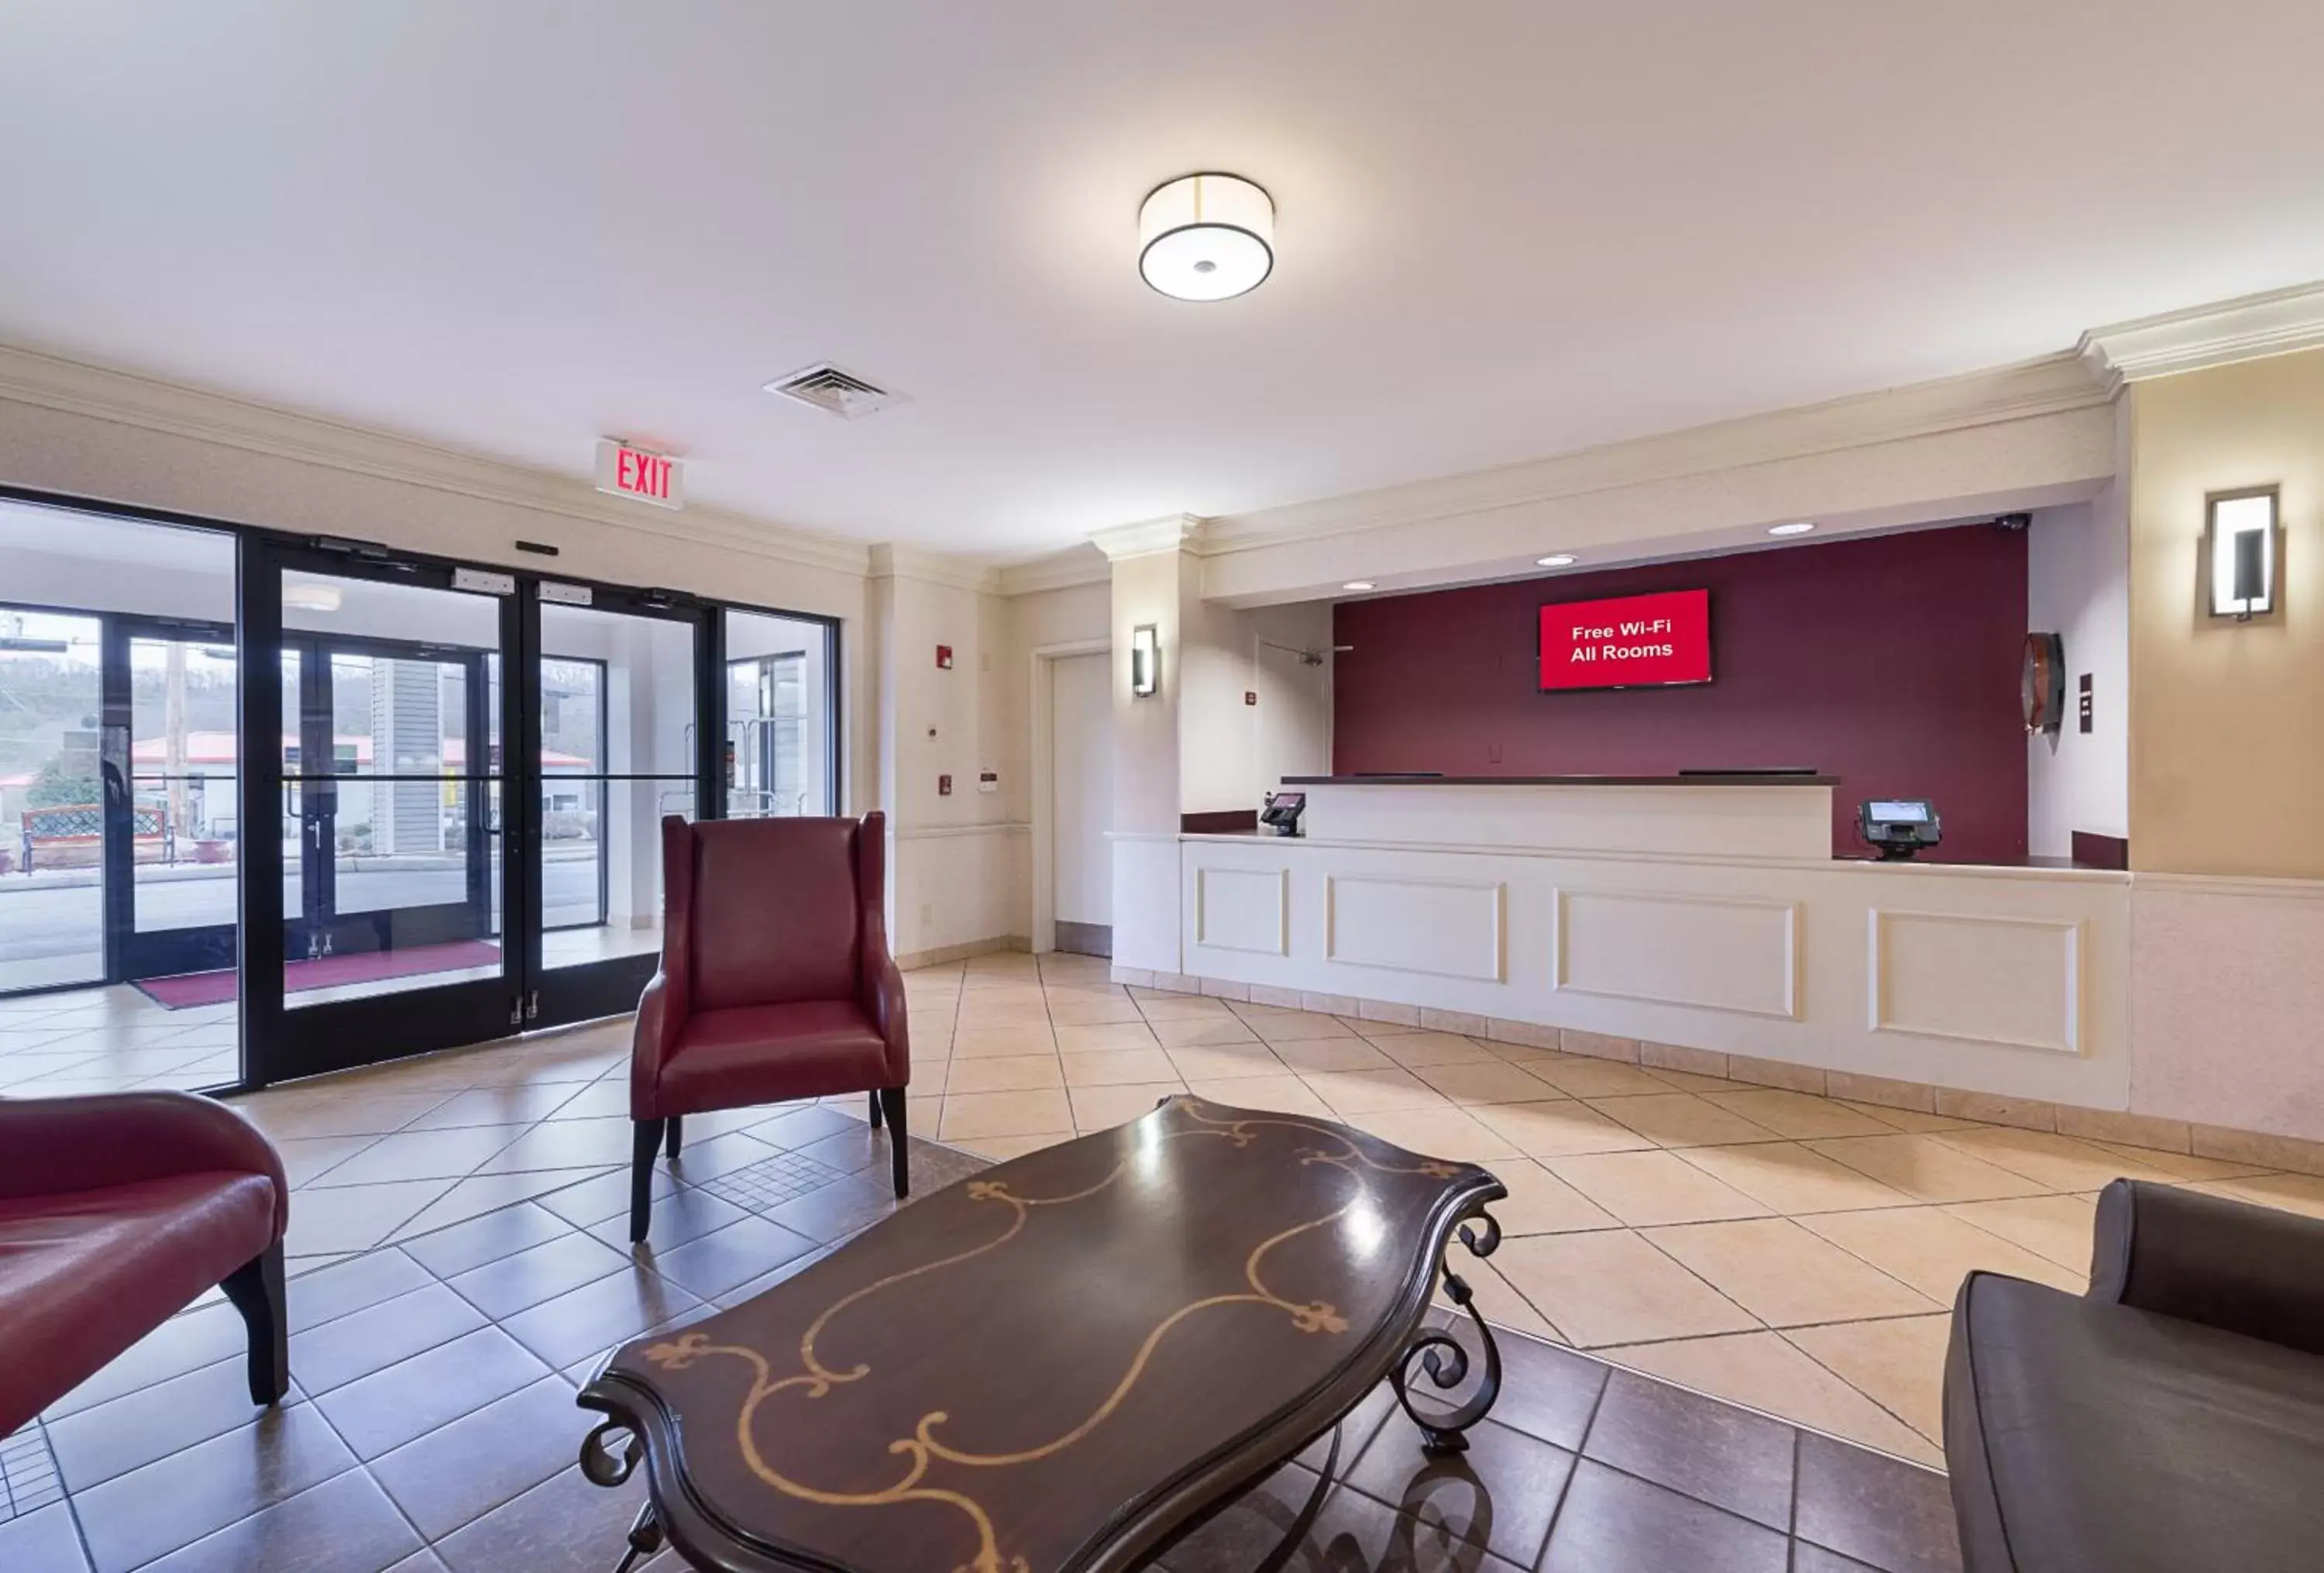 Lobby or reception in Red Roof Inn Etowah – Athens, TN